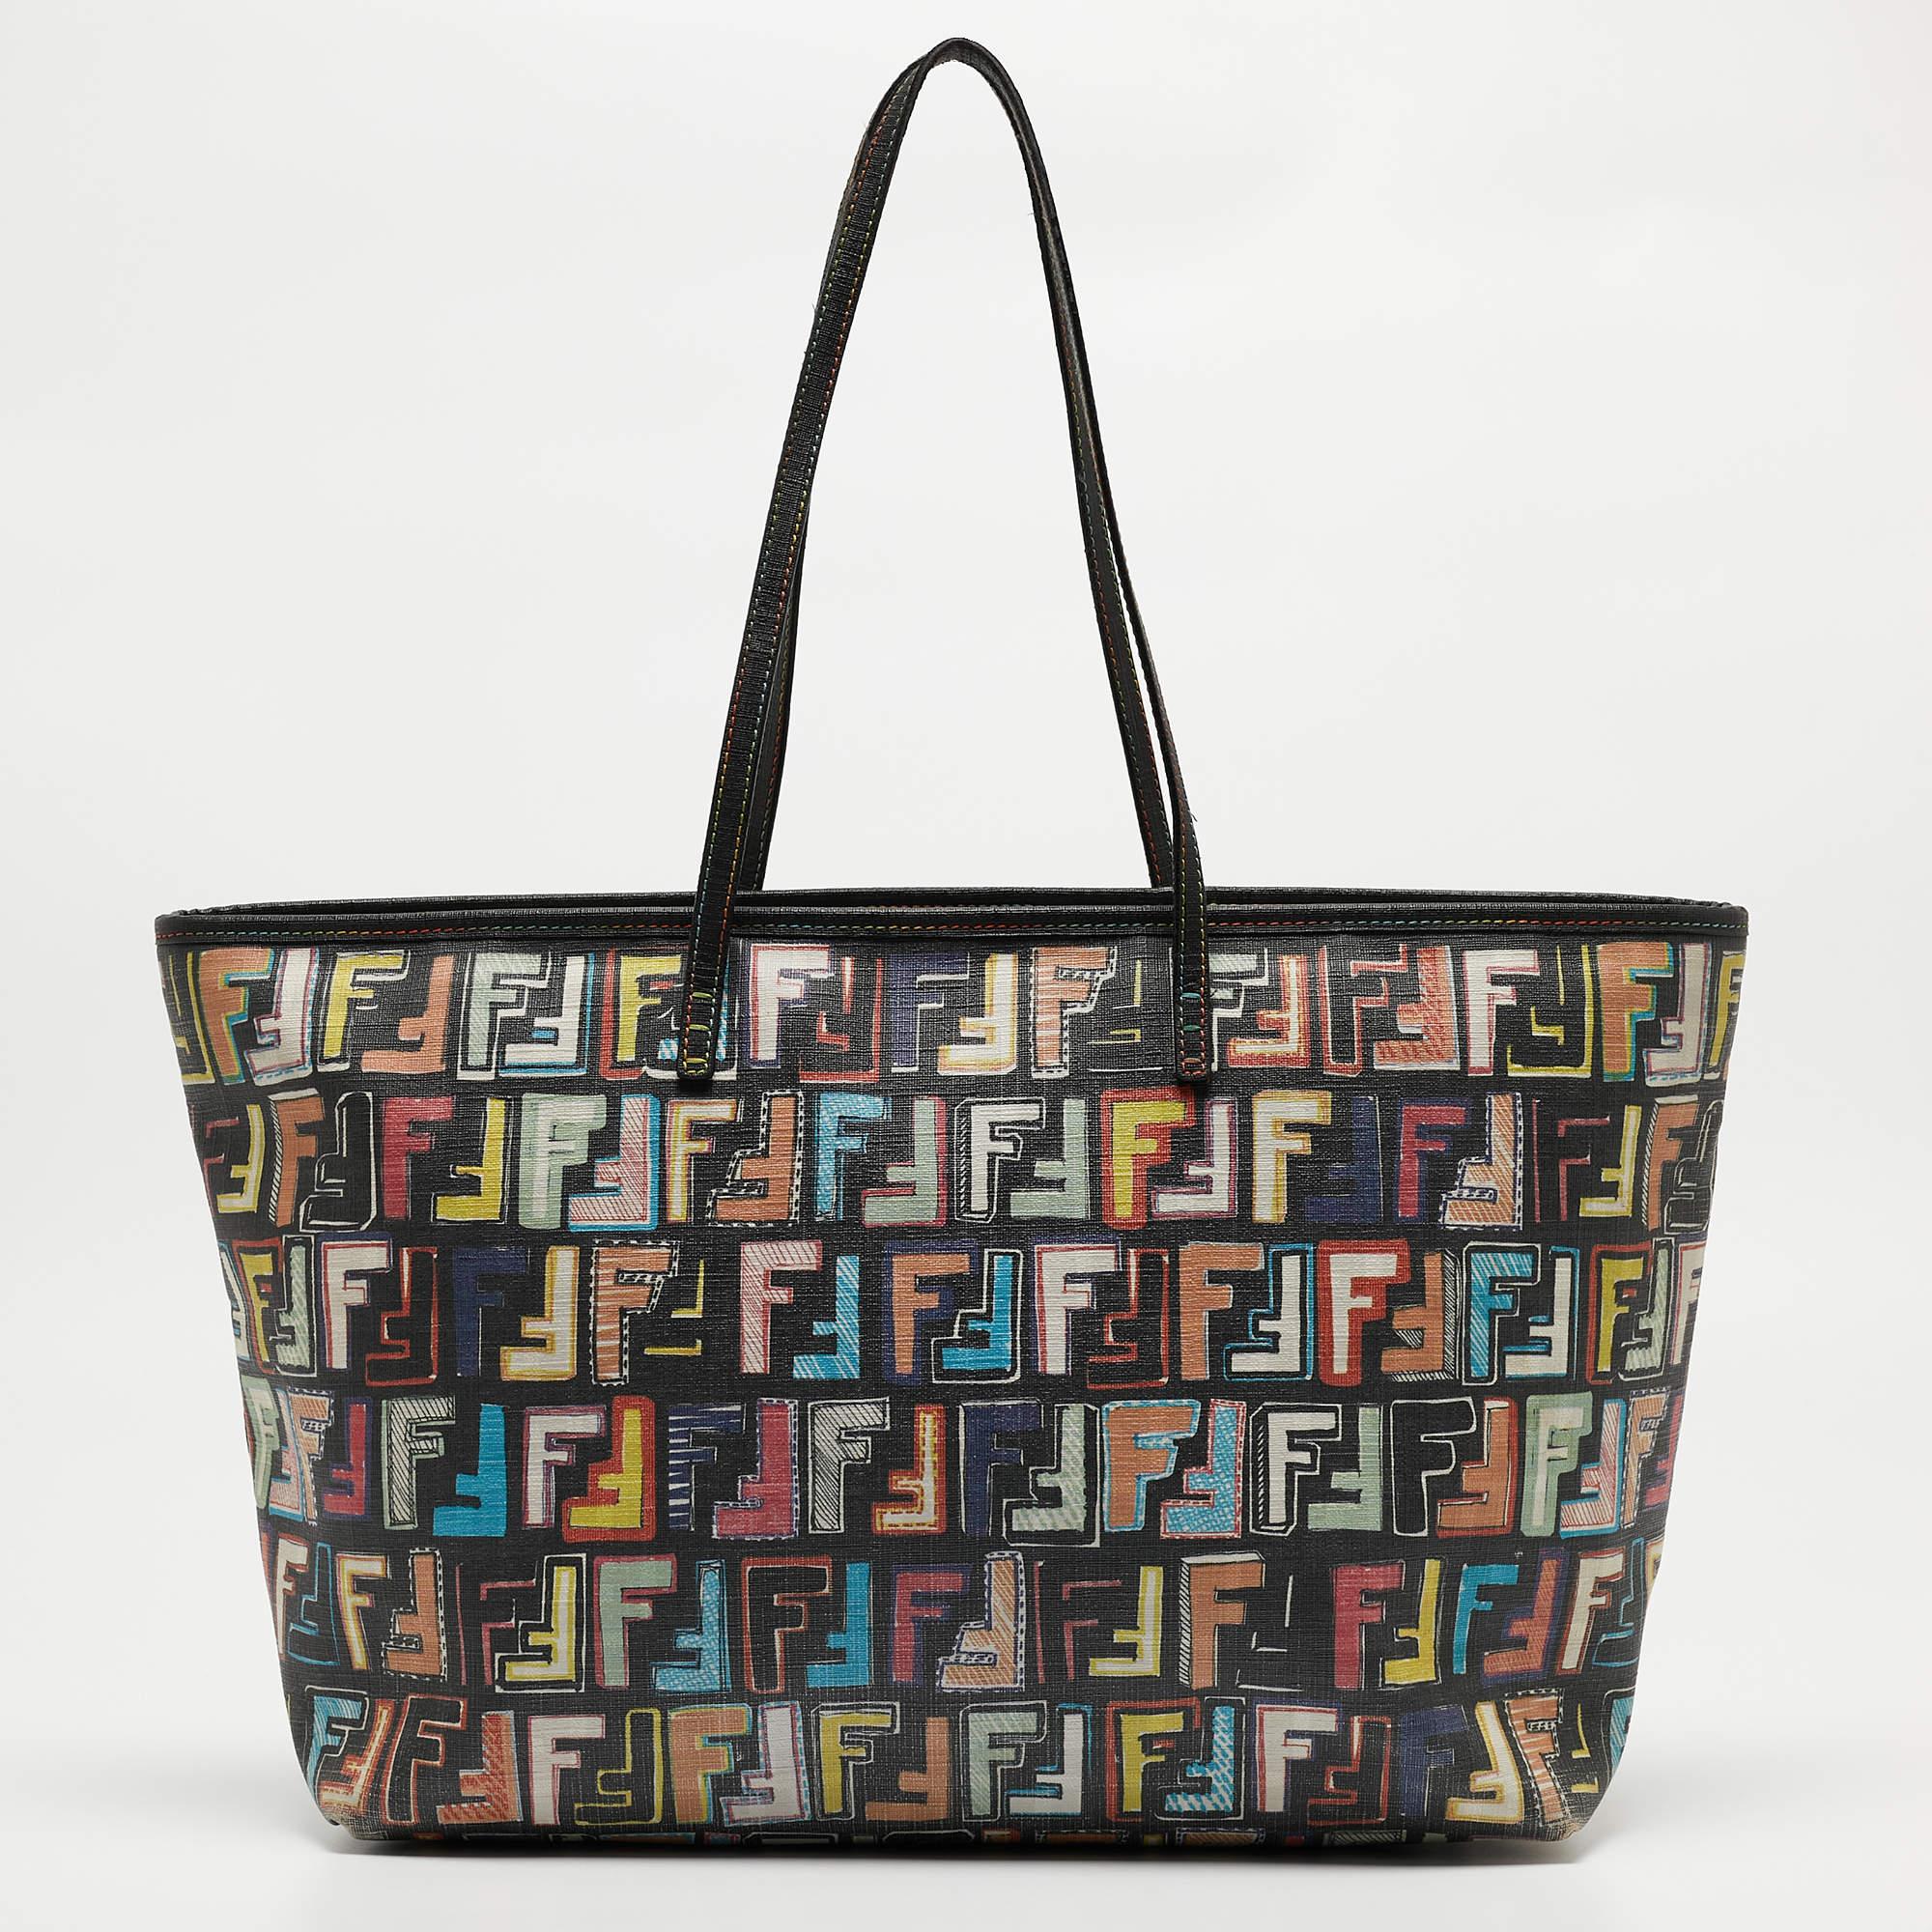 Be it your daily commute to work, shopping sprees, and vacations, a Fendi tote bag will never fail you. This designer creation is made to last and assist you in your fashion-filled days.

Includes: Original Dustbag